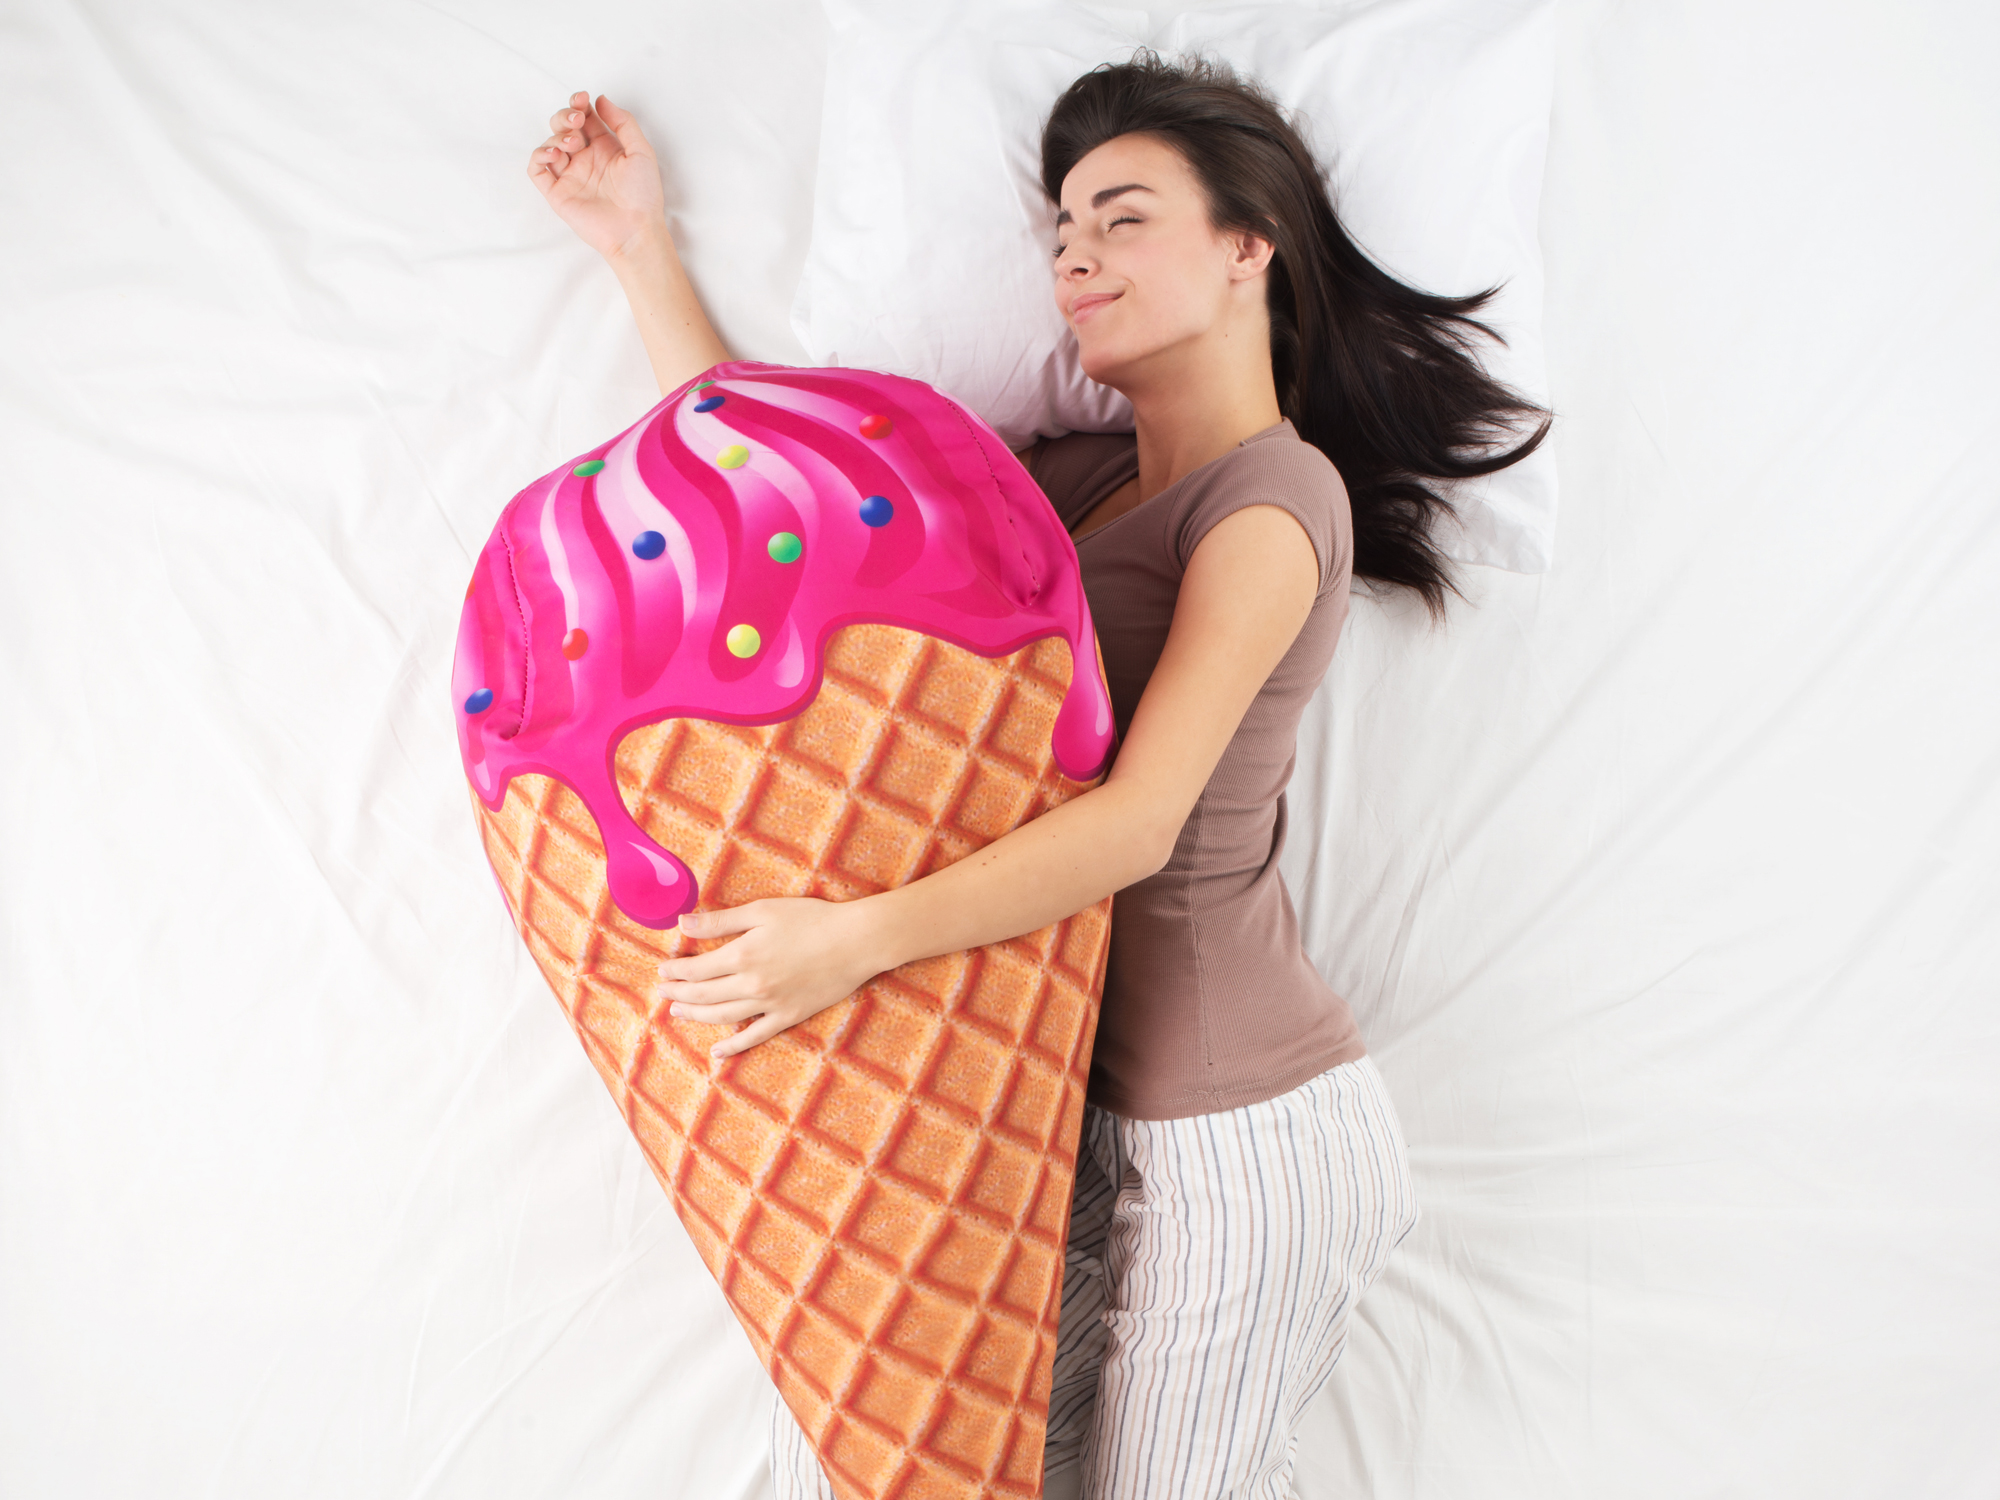 Ditch junk food cravings in your dreams